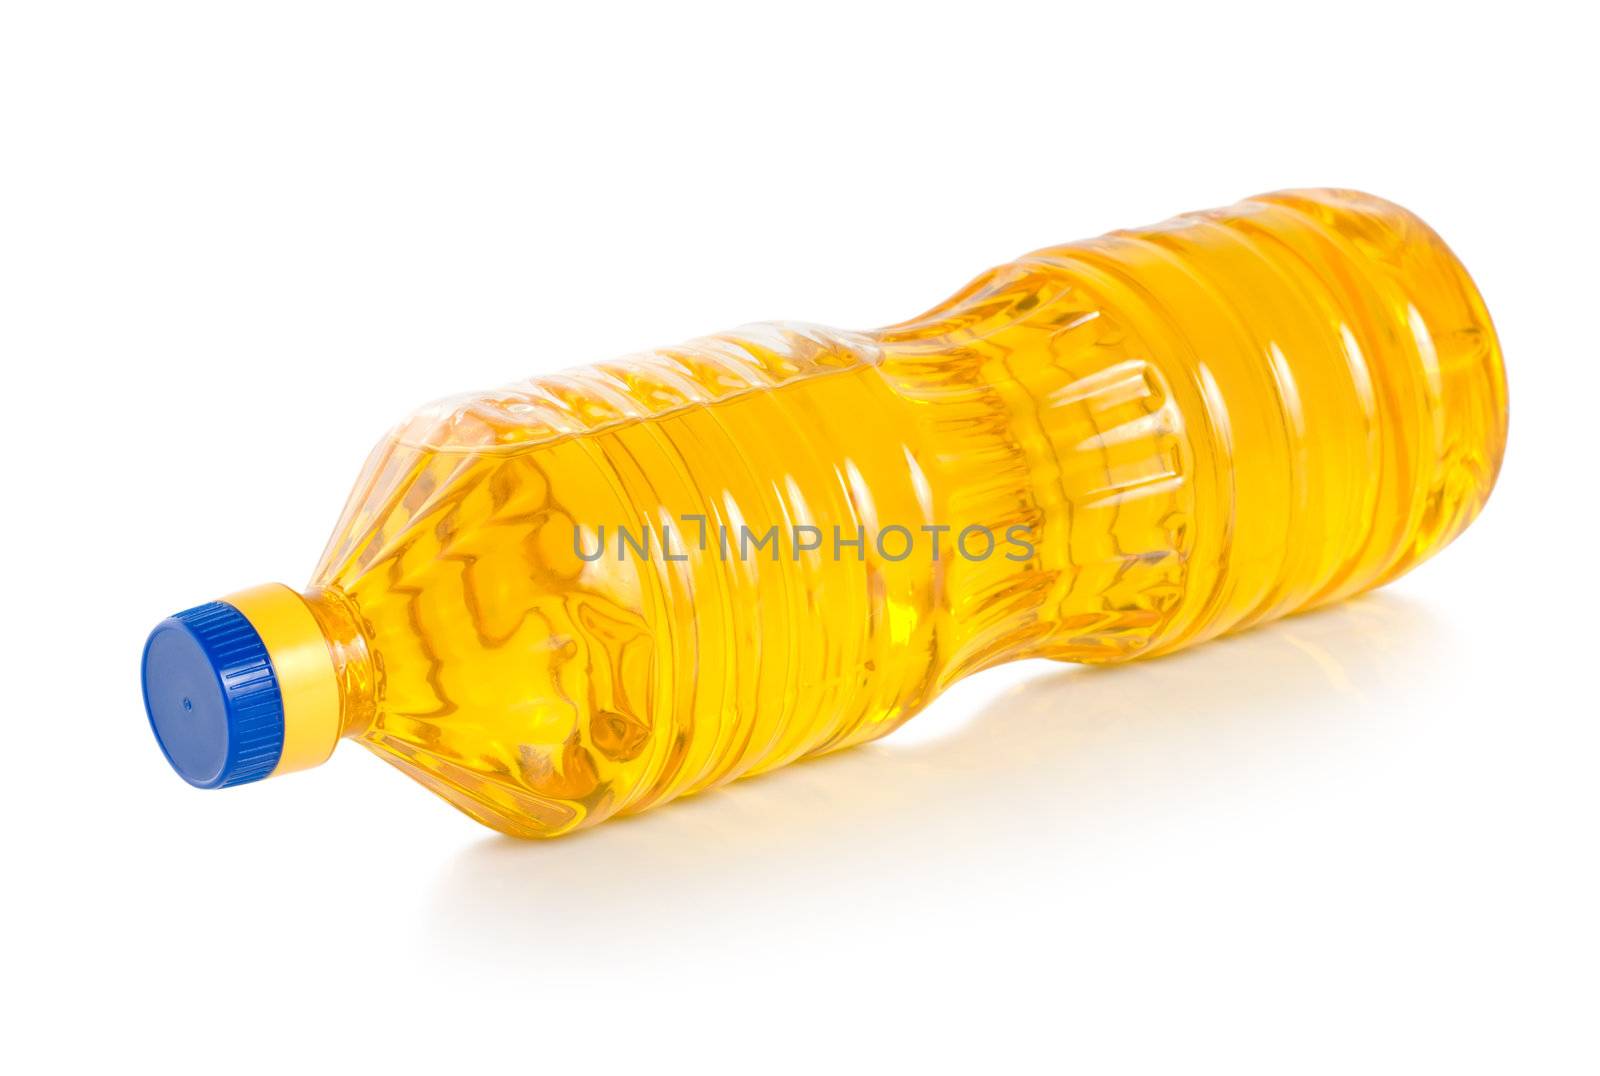 Oil in plastic bottle by Givaga